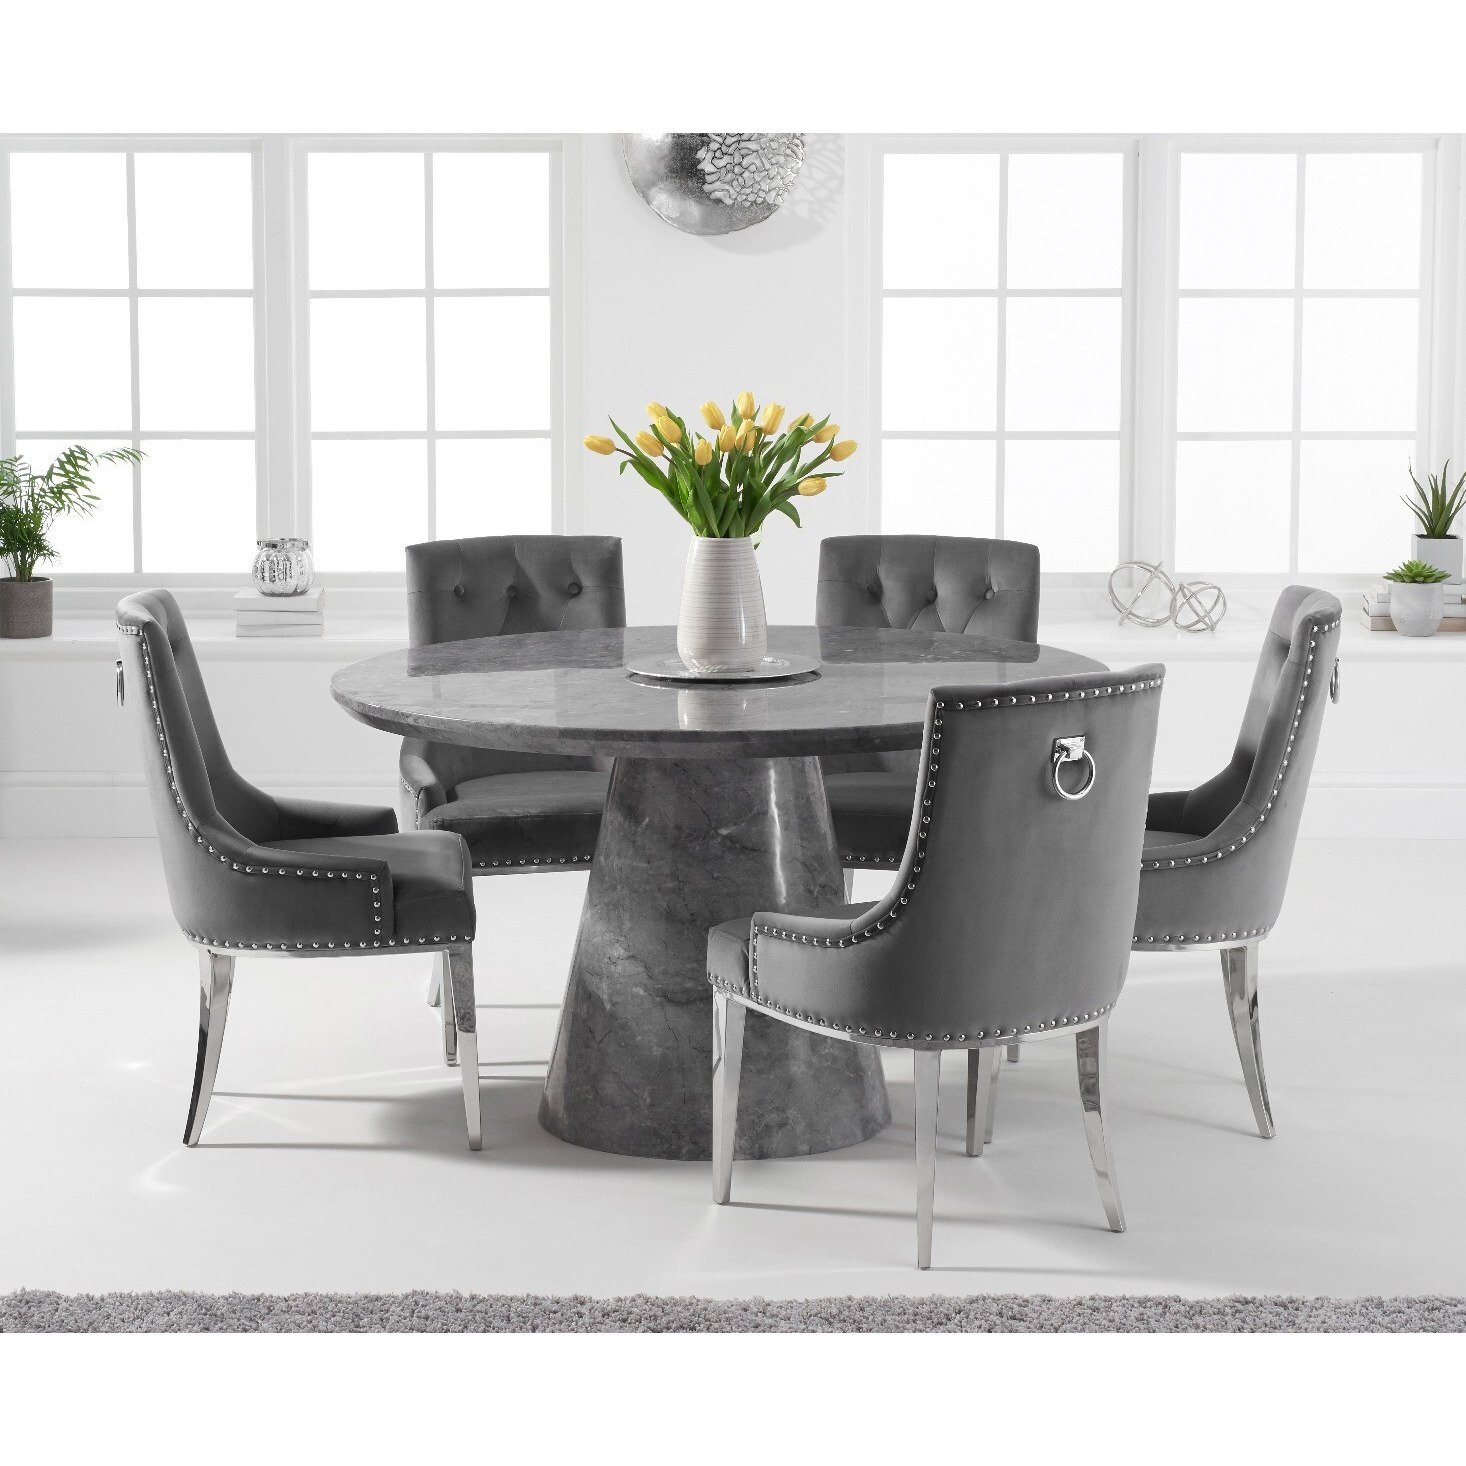 Ravello 130cm Round Grey Marble Dining Table With 6 Grey Sienna Velvet Chairs